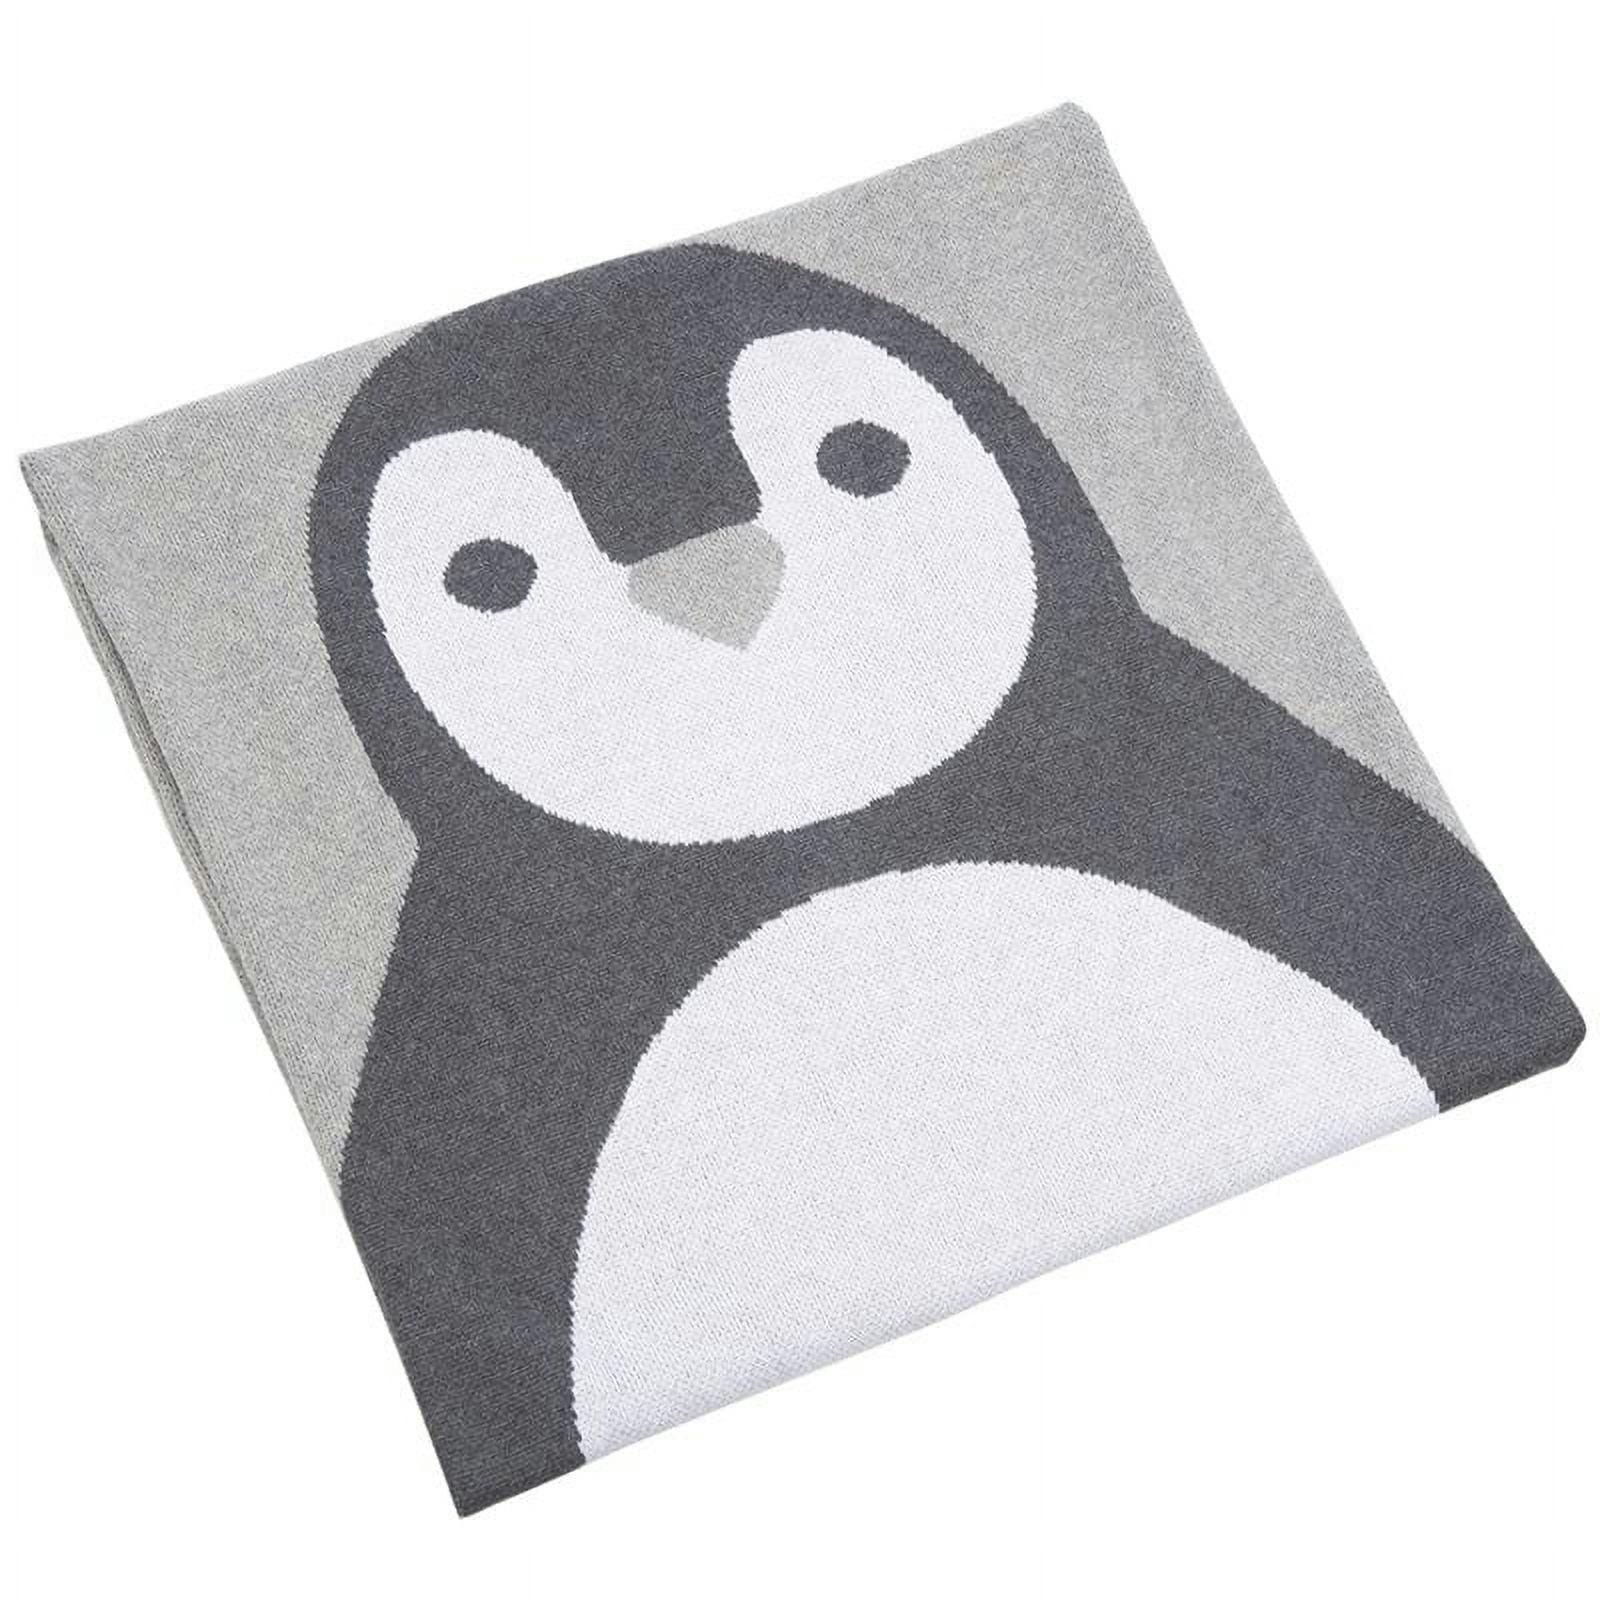 Olly the Penguin 32" x 40" Grey and White Cotton Baby Throw